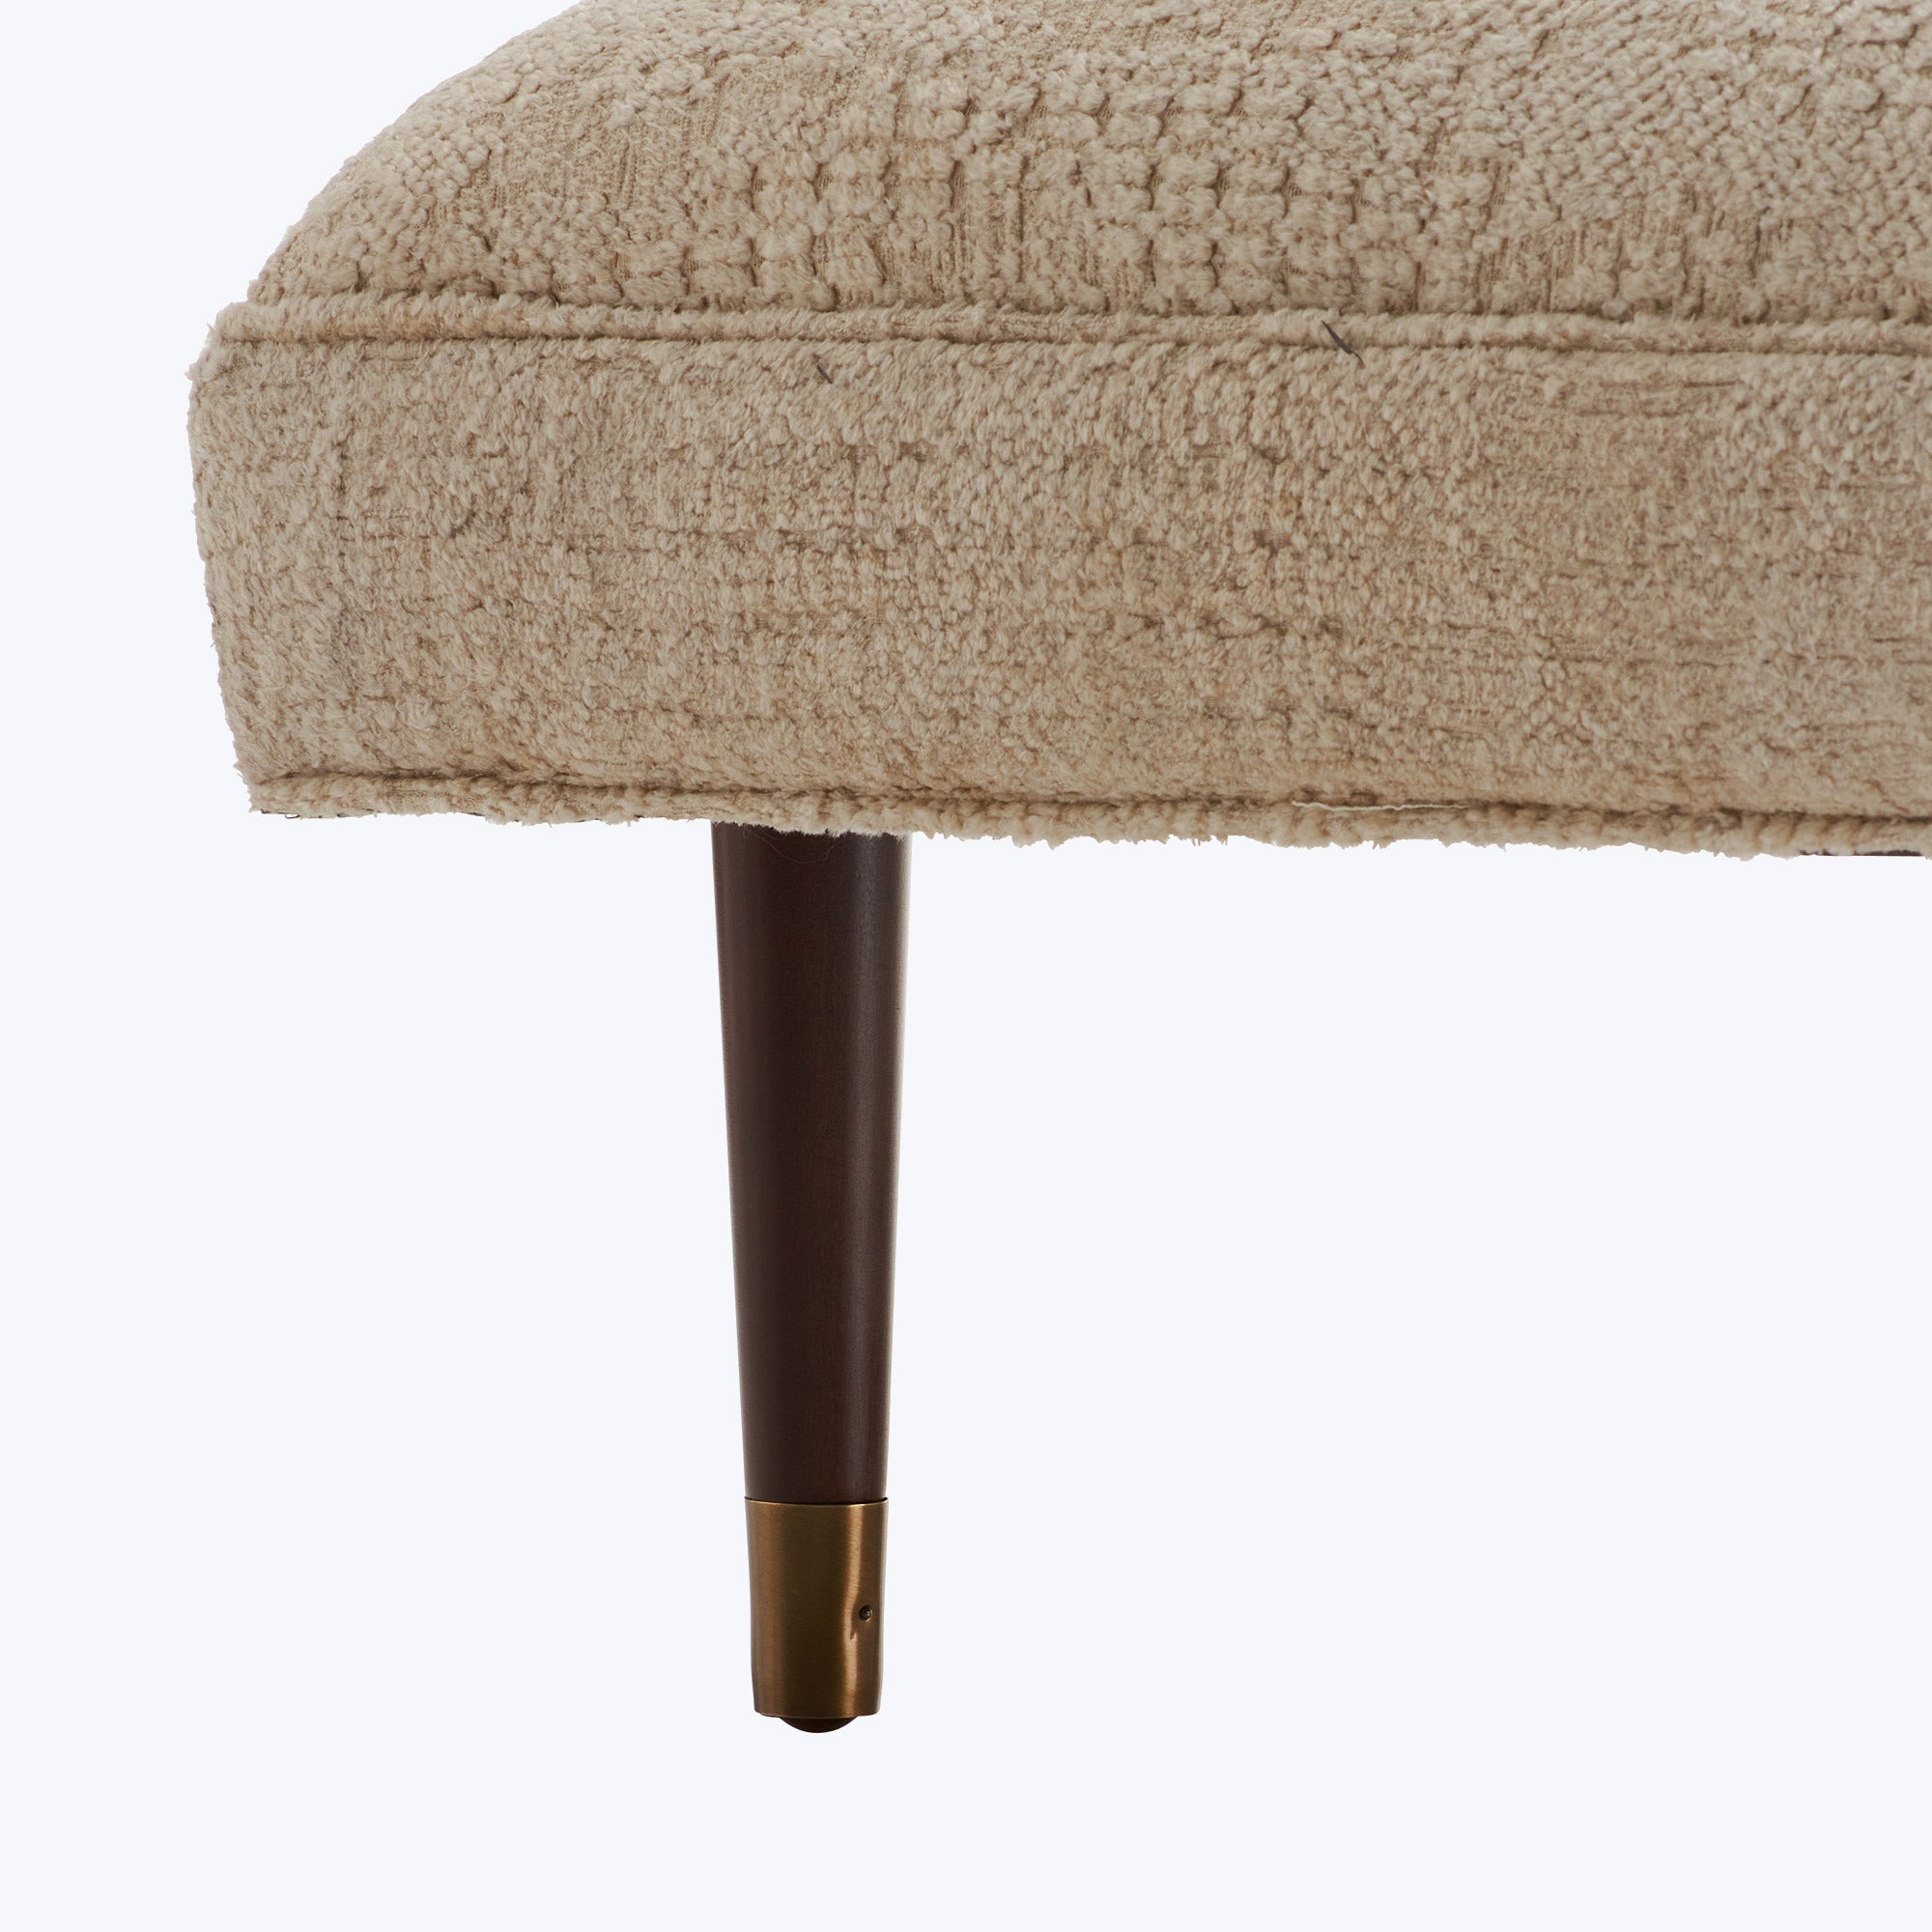 Close-up of a plush, beige sofa leg with dark wooden base and golden cap.